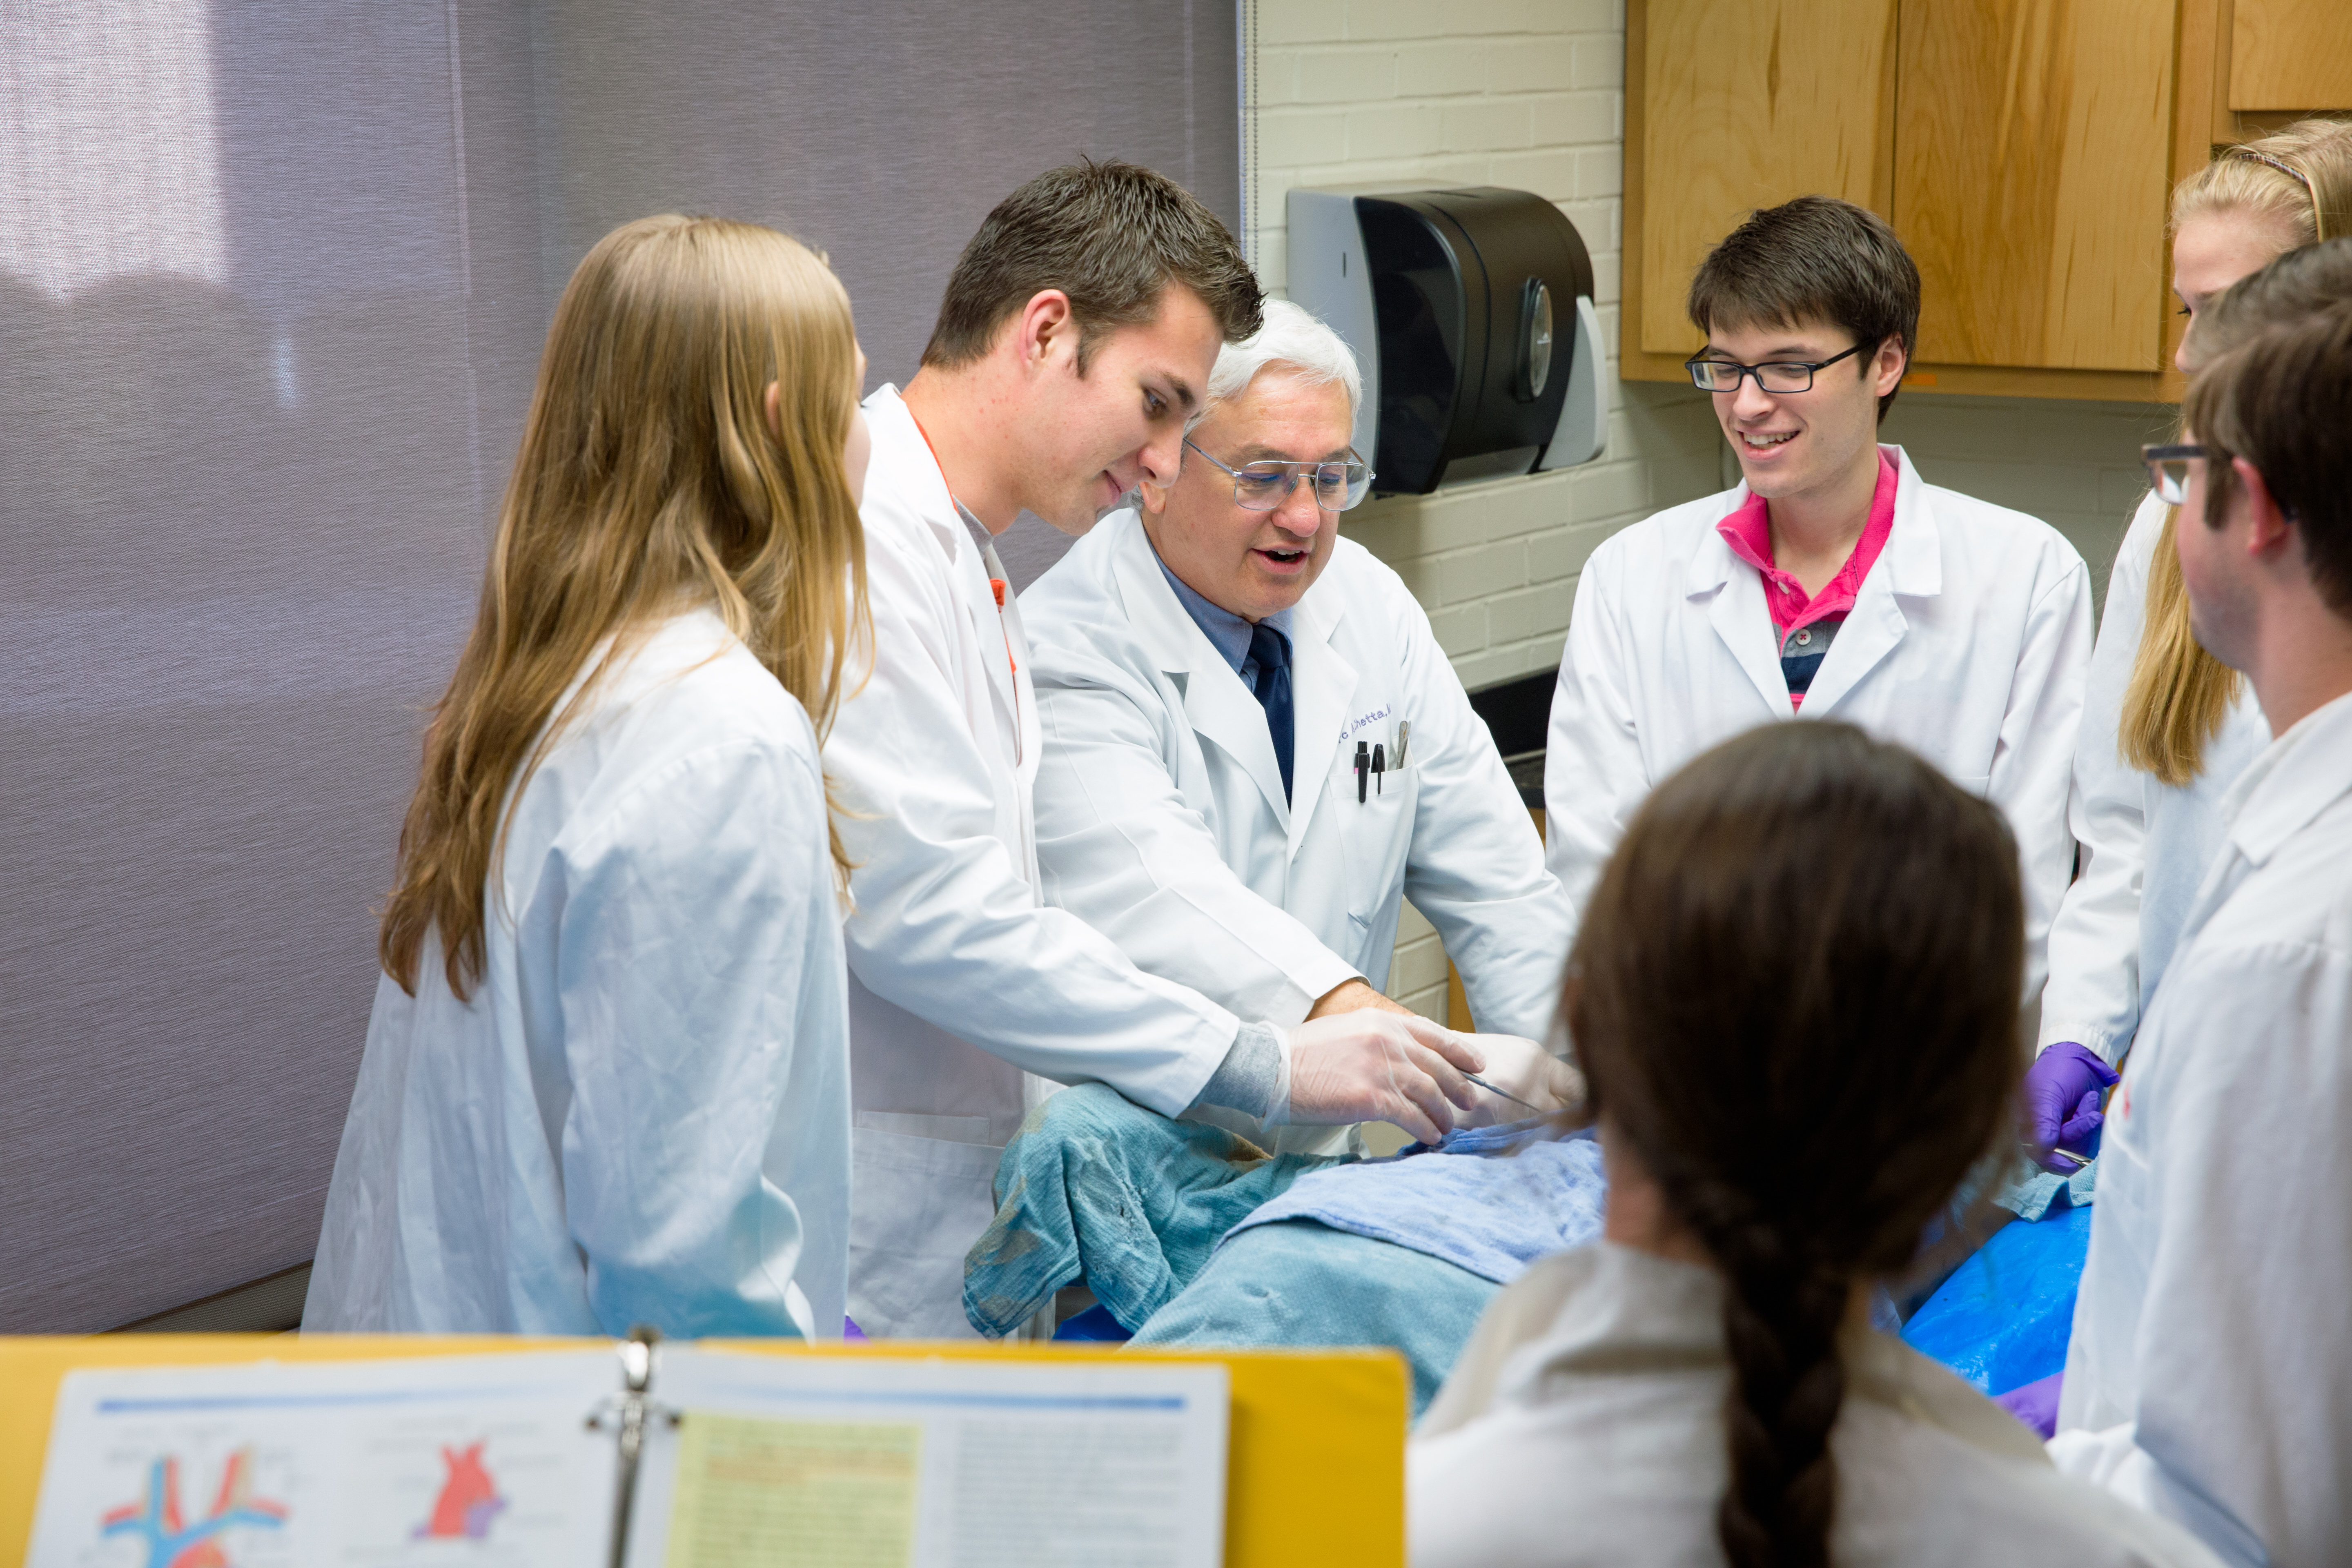 Dr. Marc Chetta works with premed students in the cadaver lab